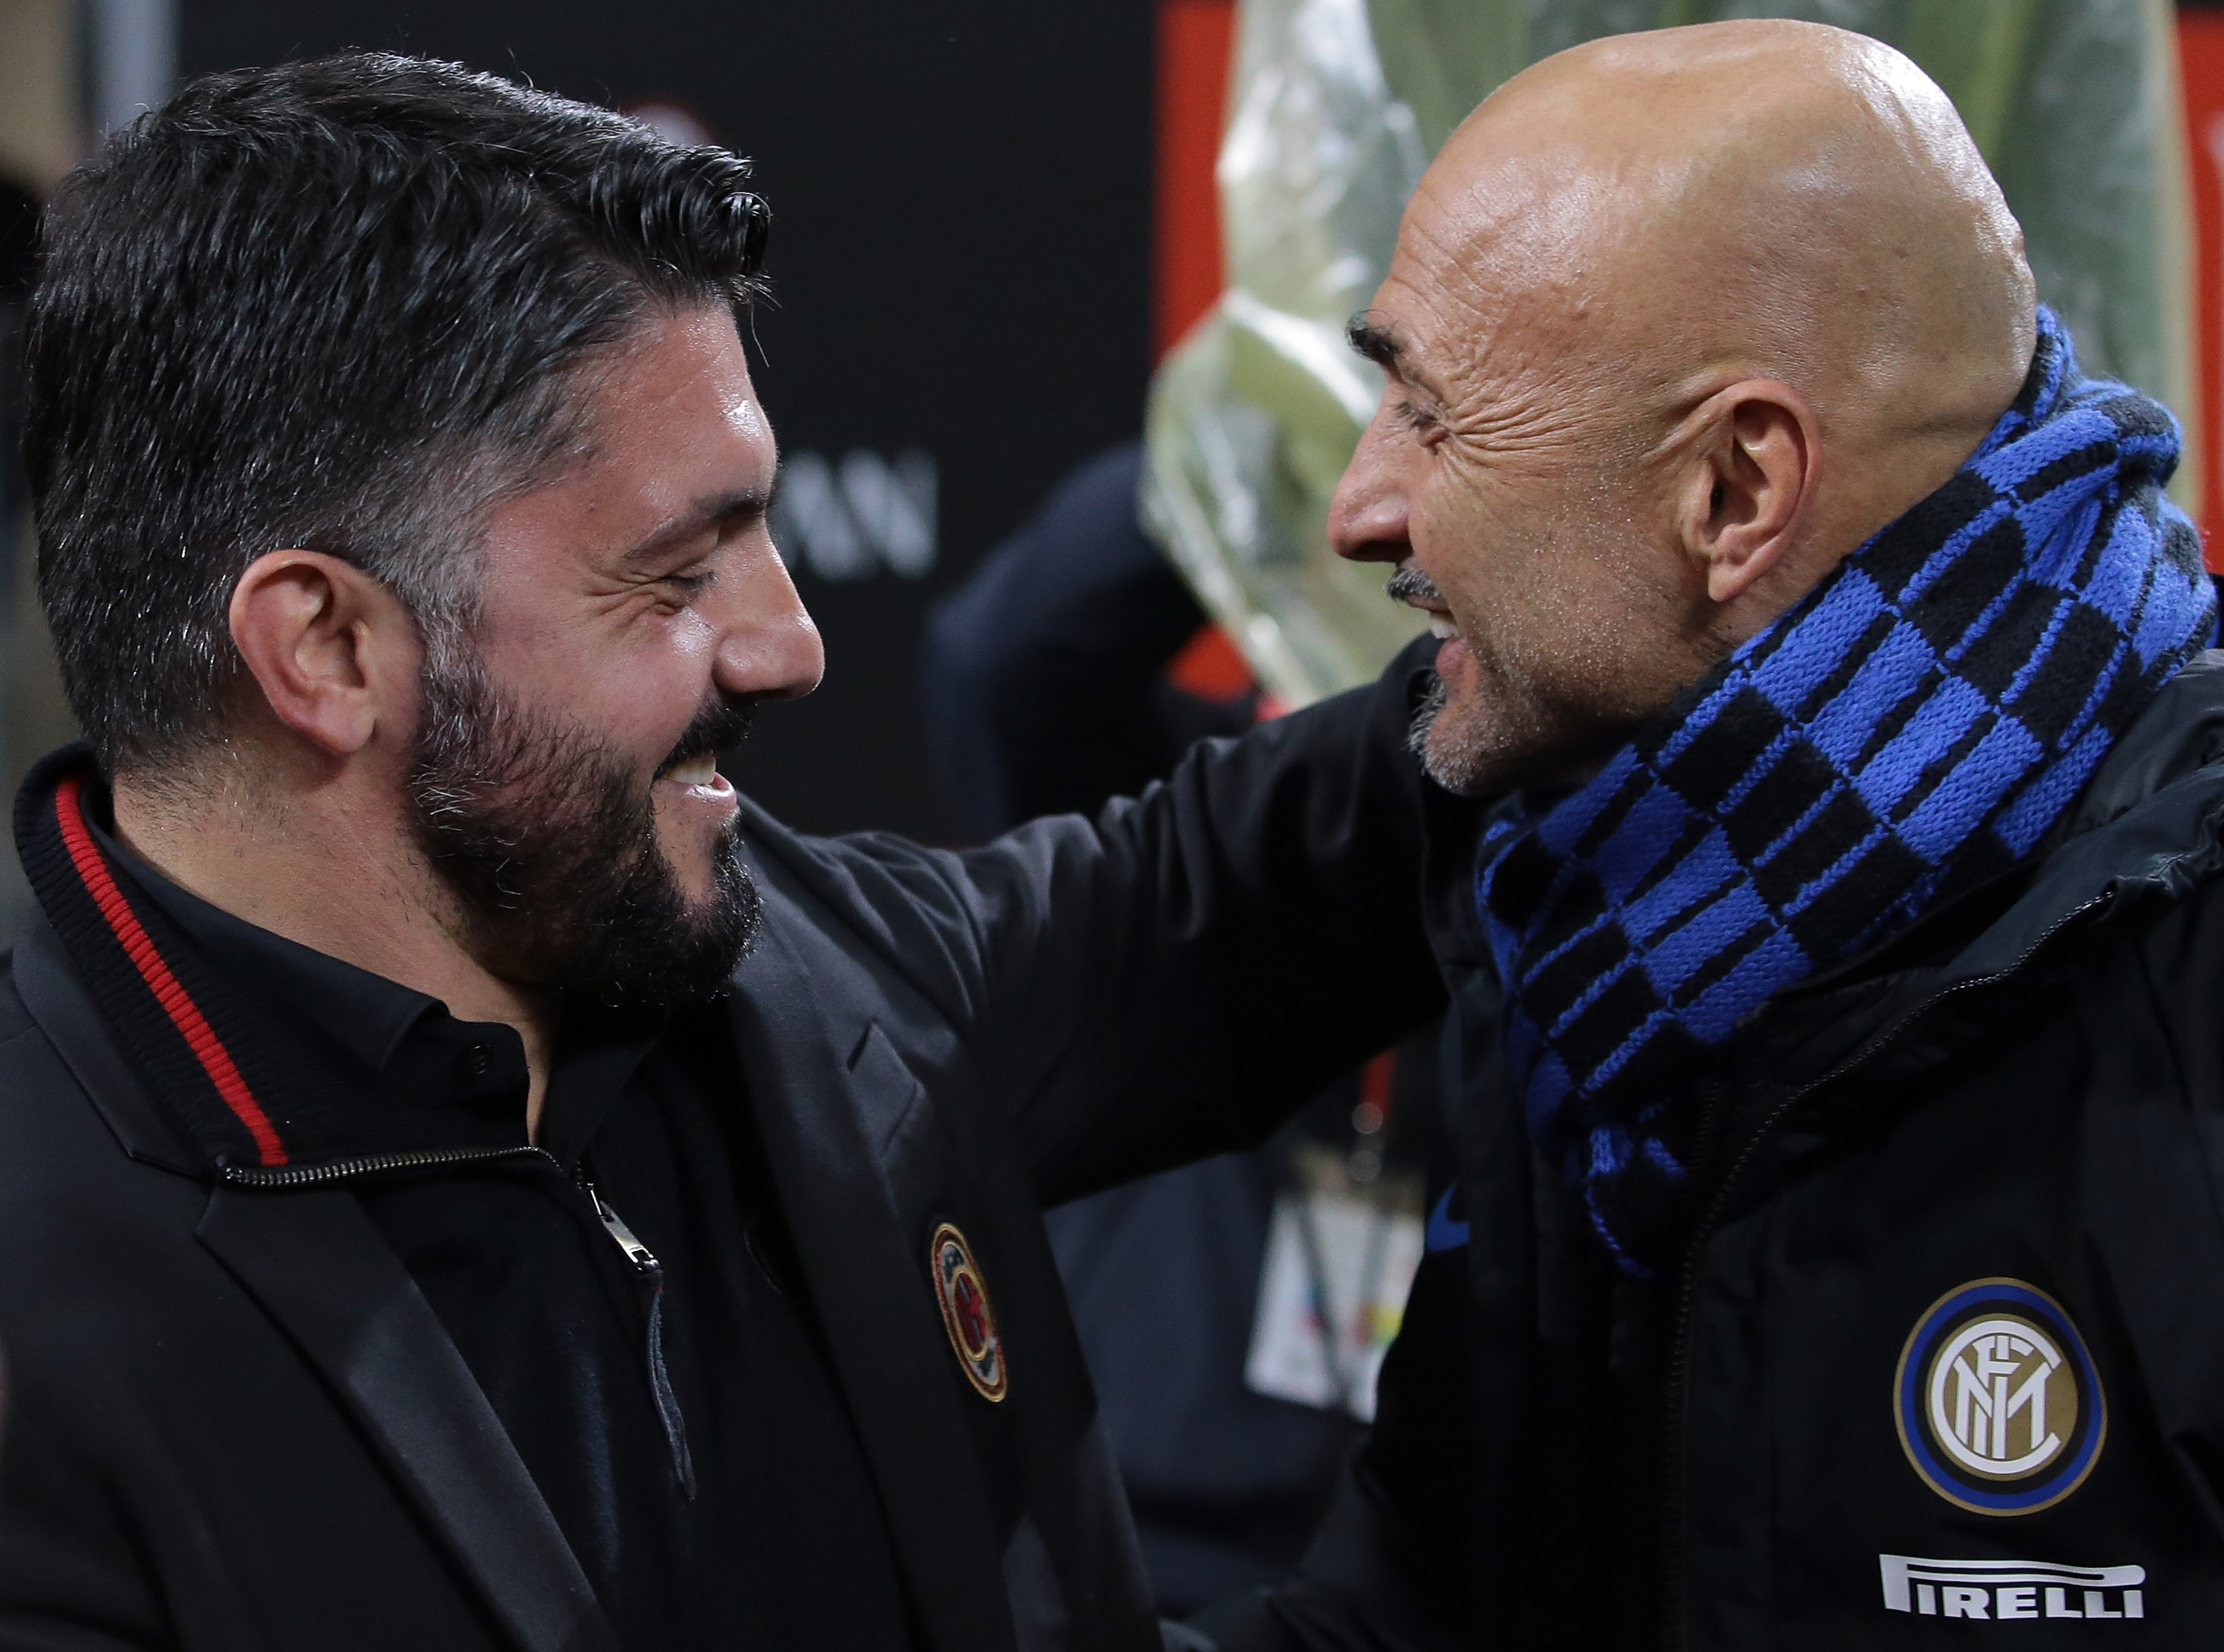 MILAN, ITALY - DECEMBER 27:  AC Milan coach Ivan Gennaro Gattuso (L) embraces FC Internazionale Milano coach Luciano Spalletti prior to the TIM Cup match between AC Milan and FC Internazionale at Stadio Giuseppe Meazza on December 27, 2017 in Milan, Italy.  (Photo by Emilio Andreoli/Getty Images)